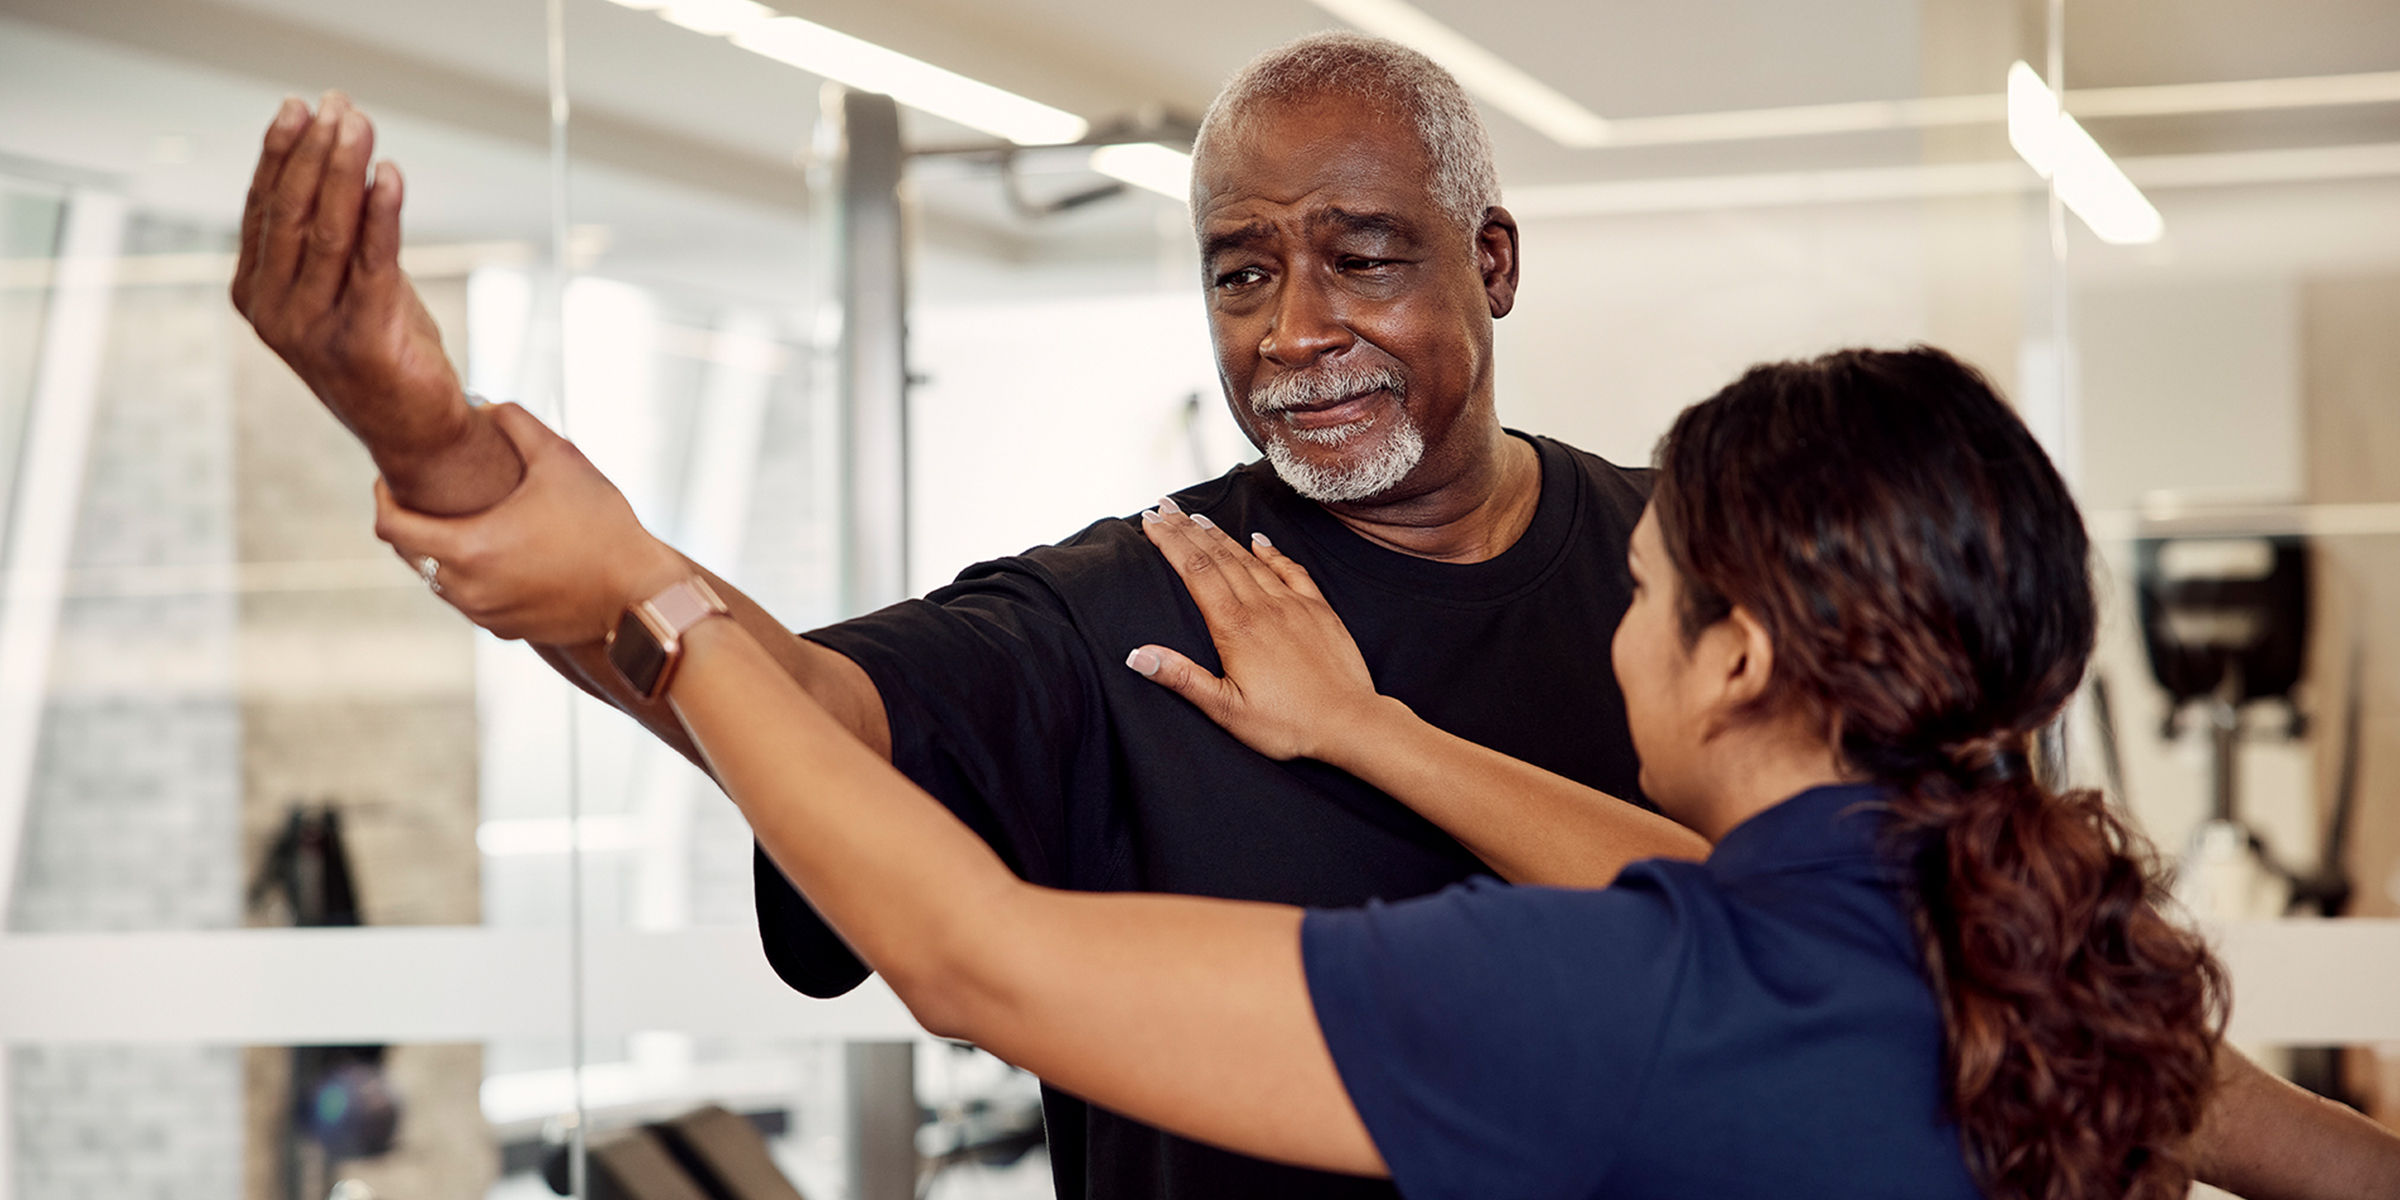 Senior man expanding the range of motion of his arm with the help of a wellness guide